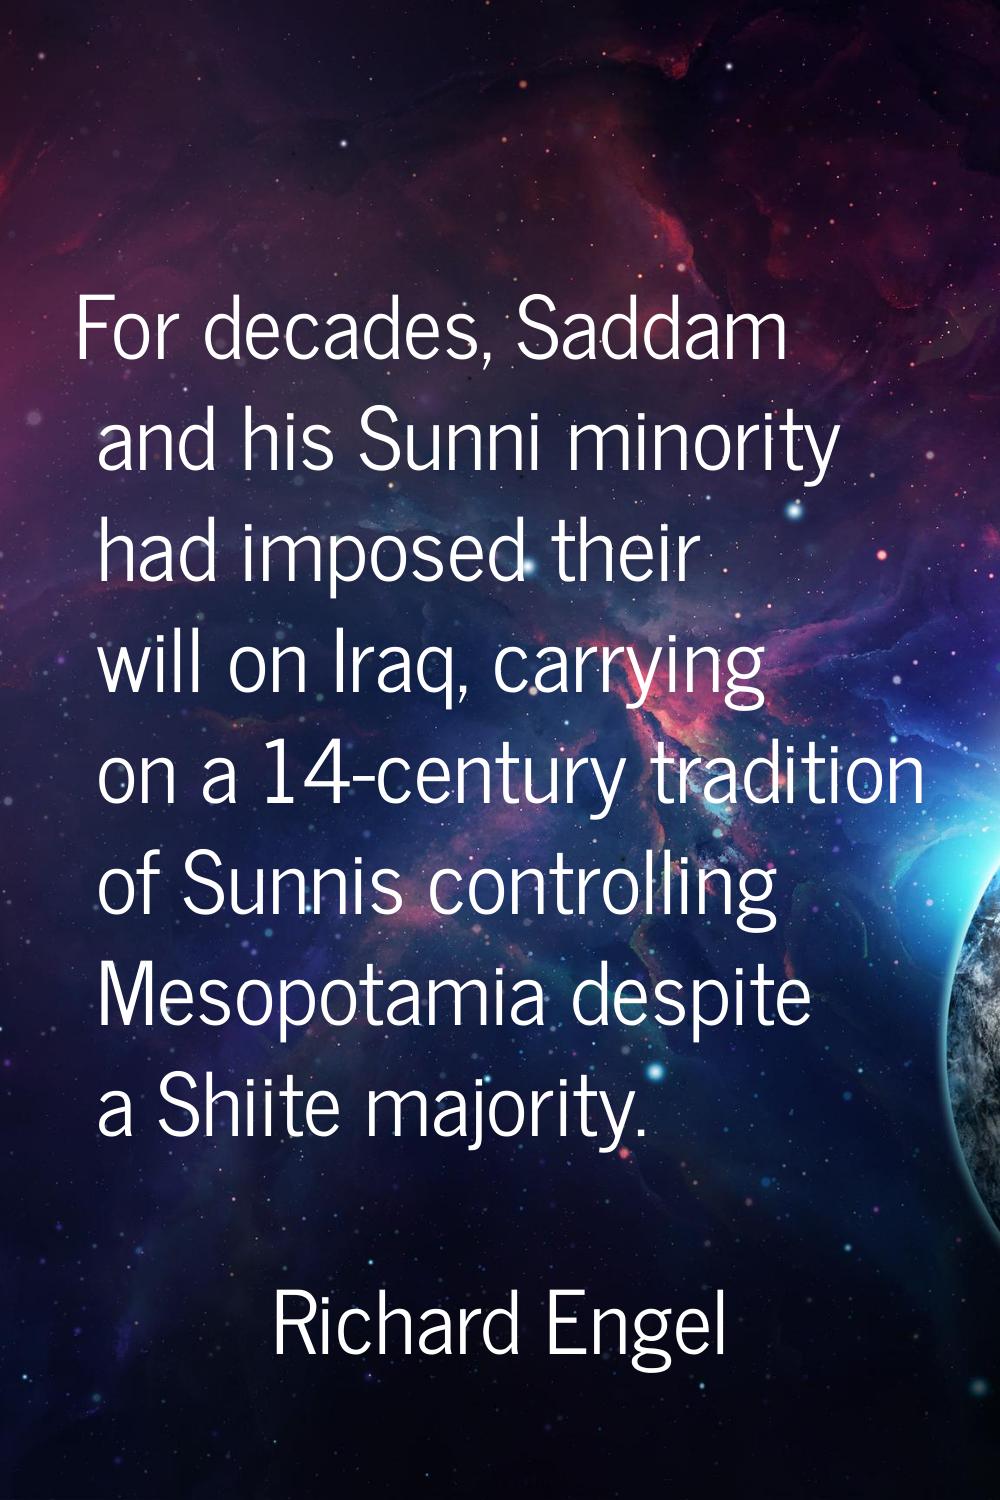 For decades, Saddam and his Sunni minority had imposed their will on Iraq, carrying on a 14-century